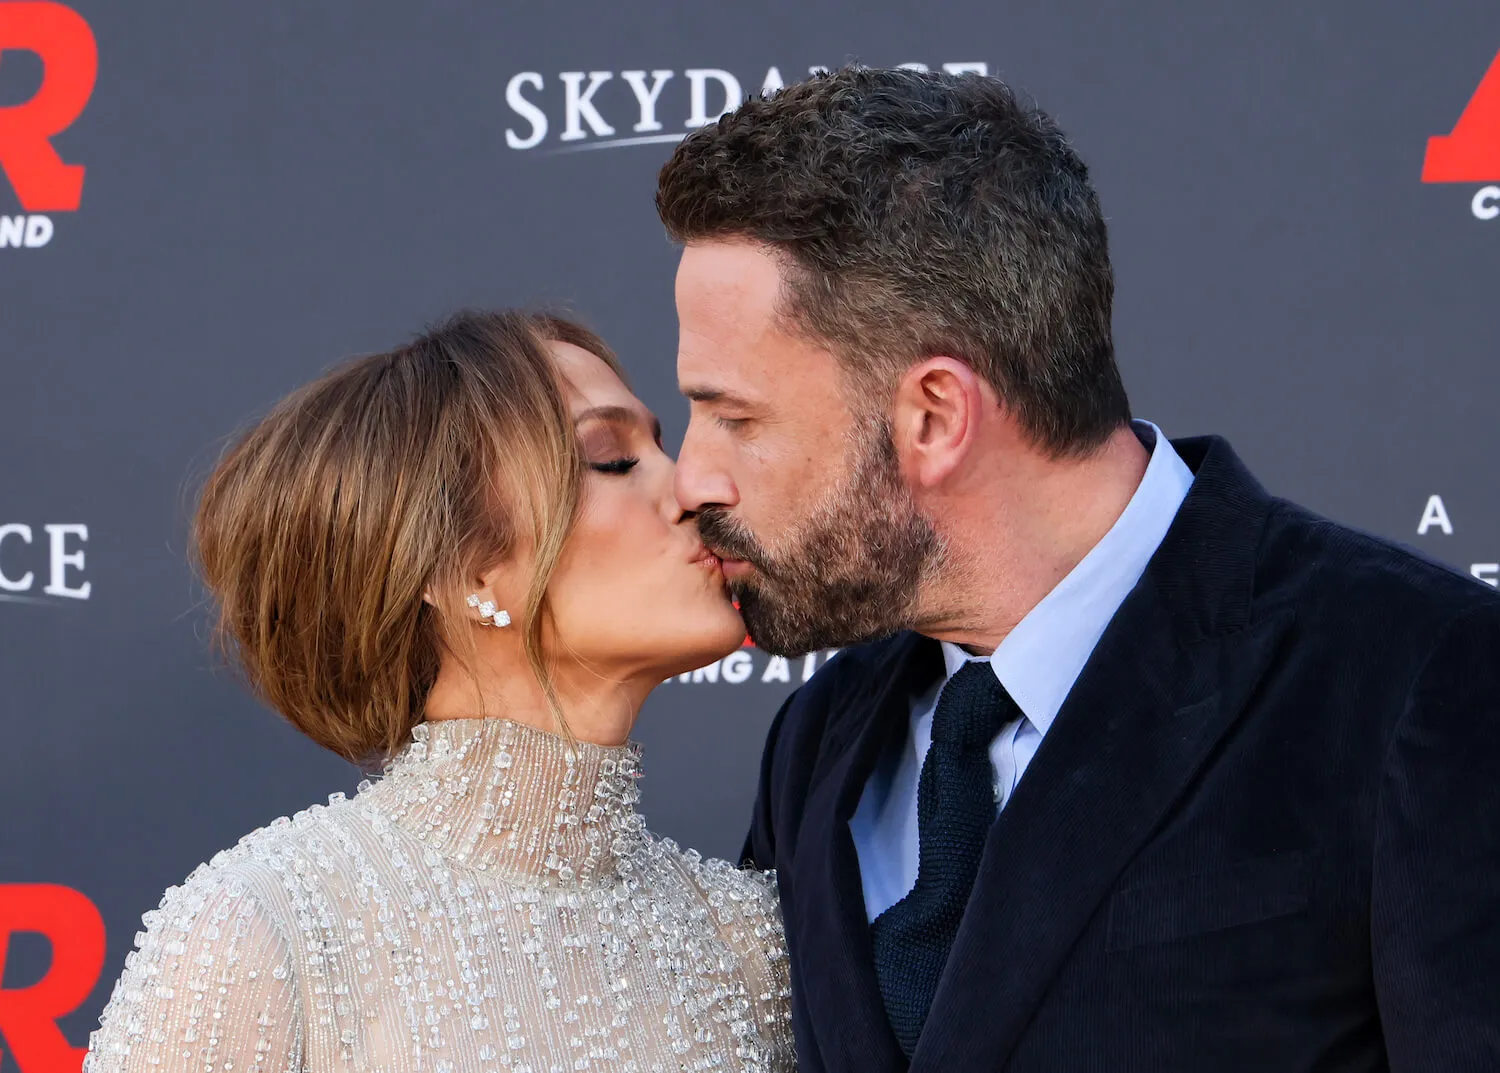 Jennifer Lopez and Ben Affleck kissing at a movie premiere in 2023